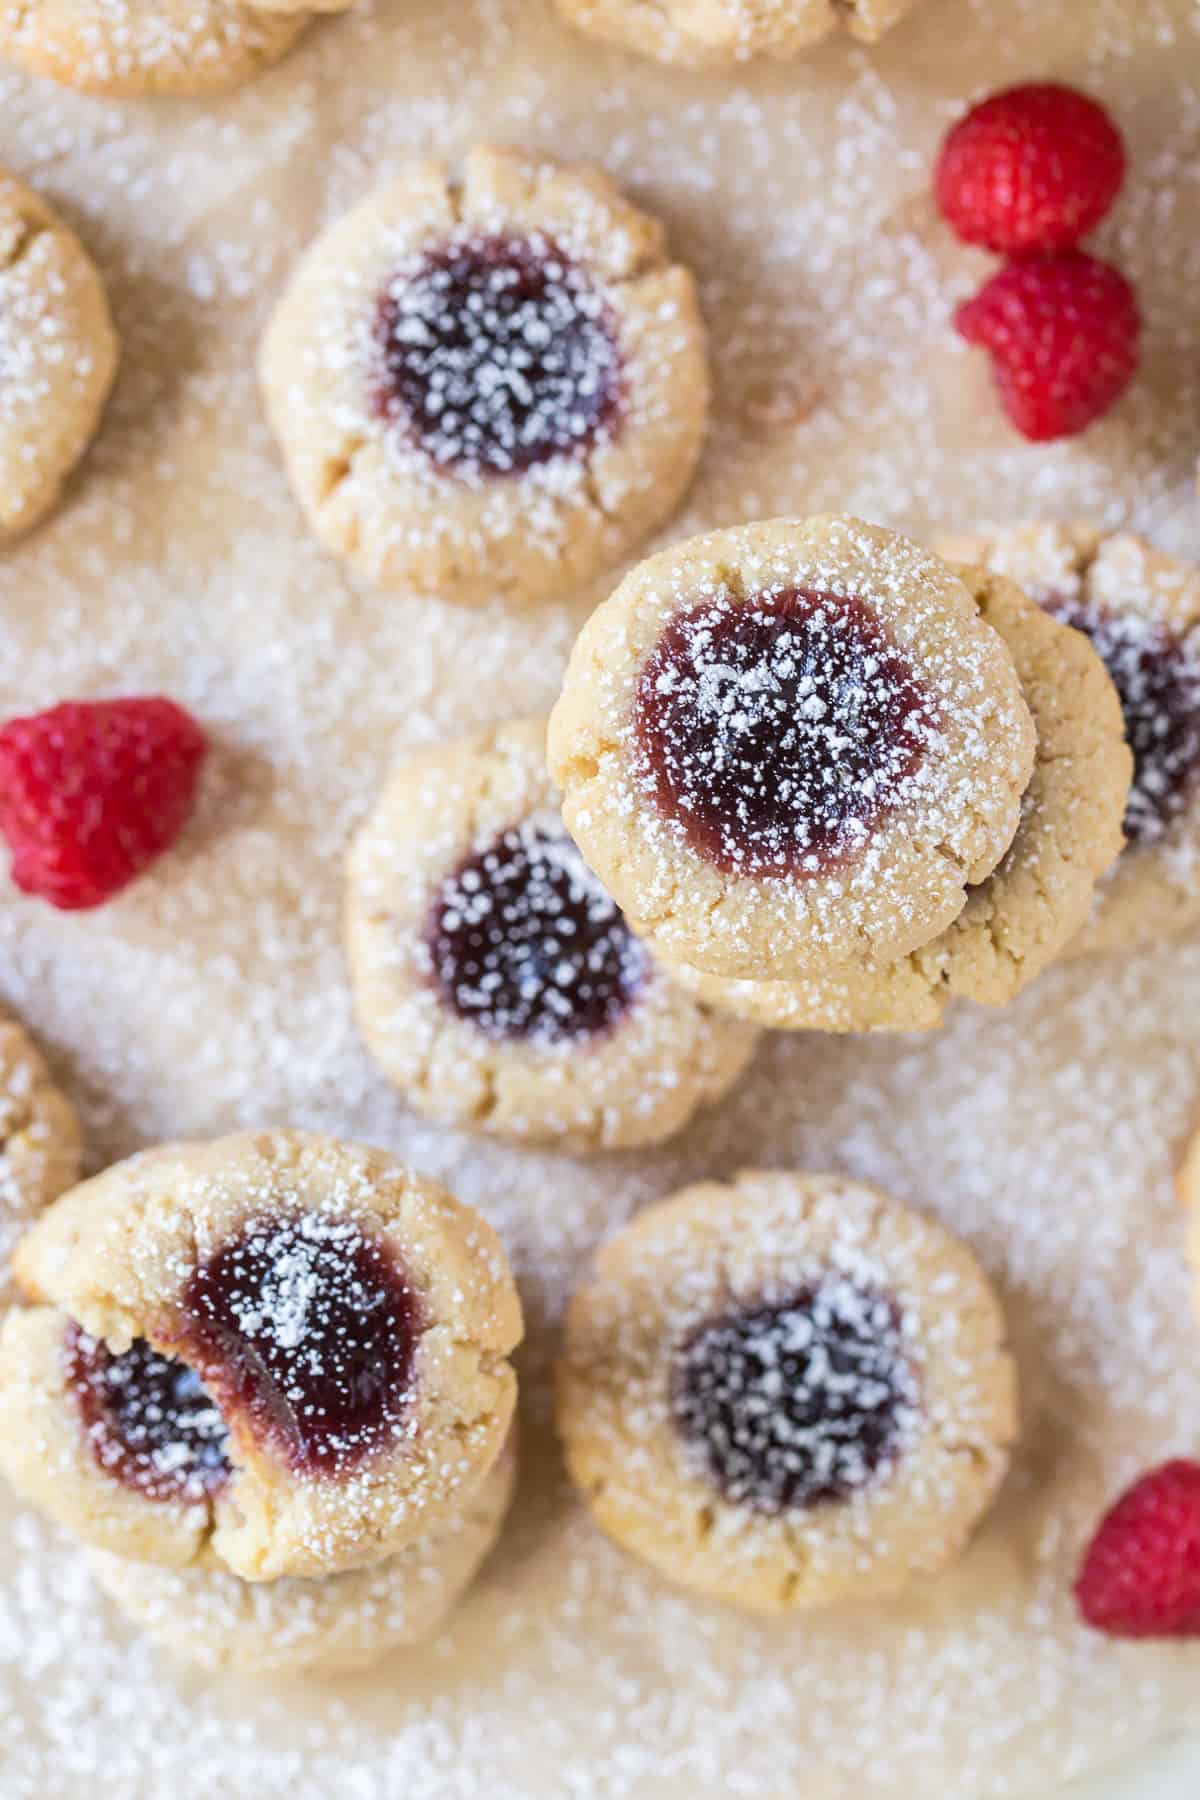 An over the top shot of thumbprint cookies with fresh raspberries.